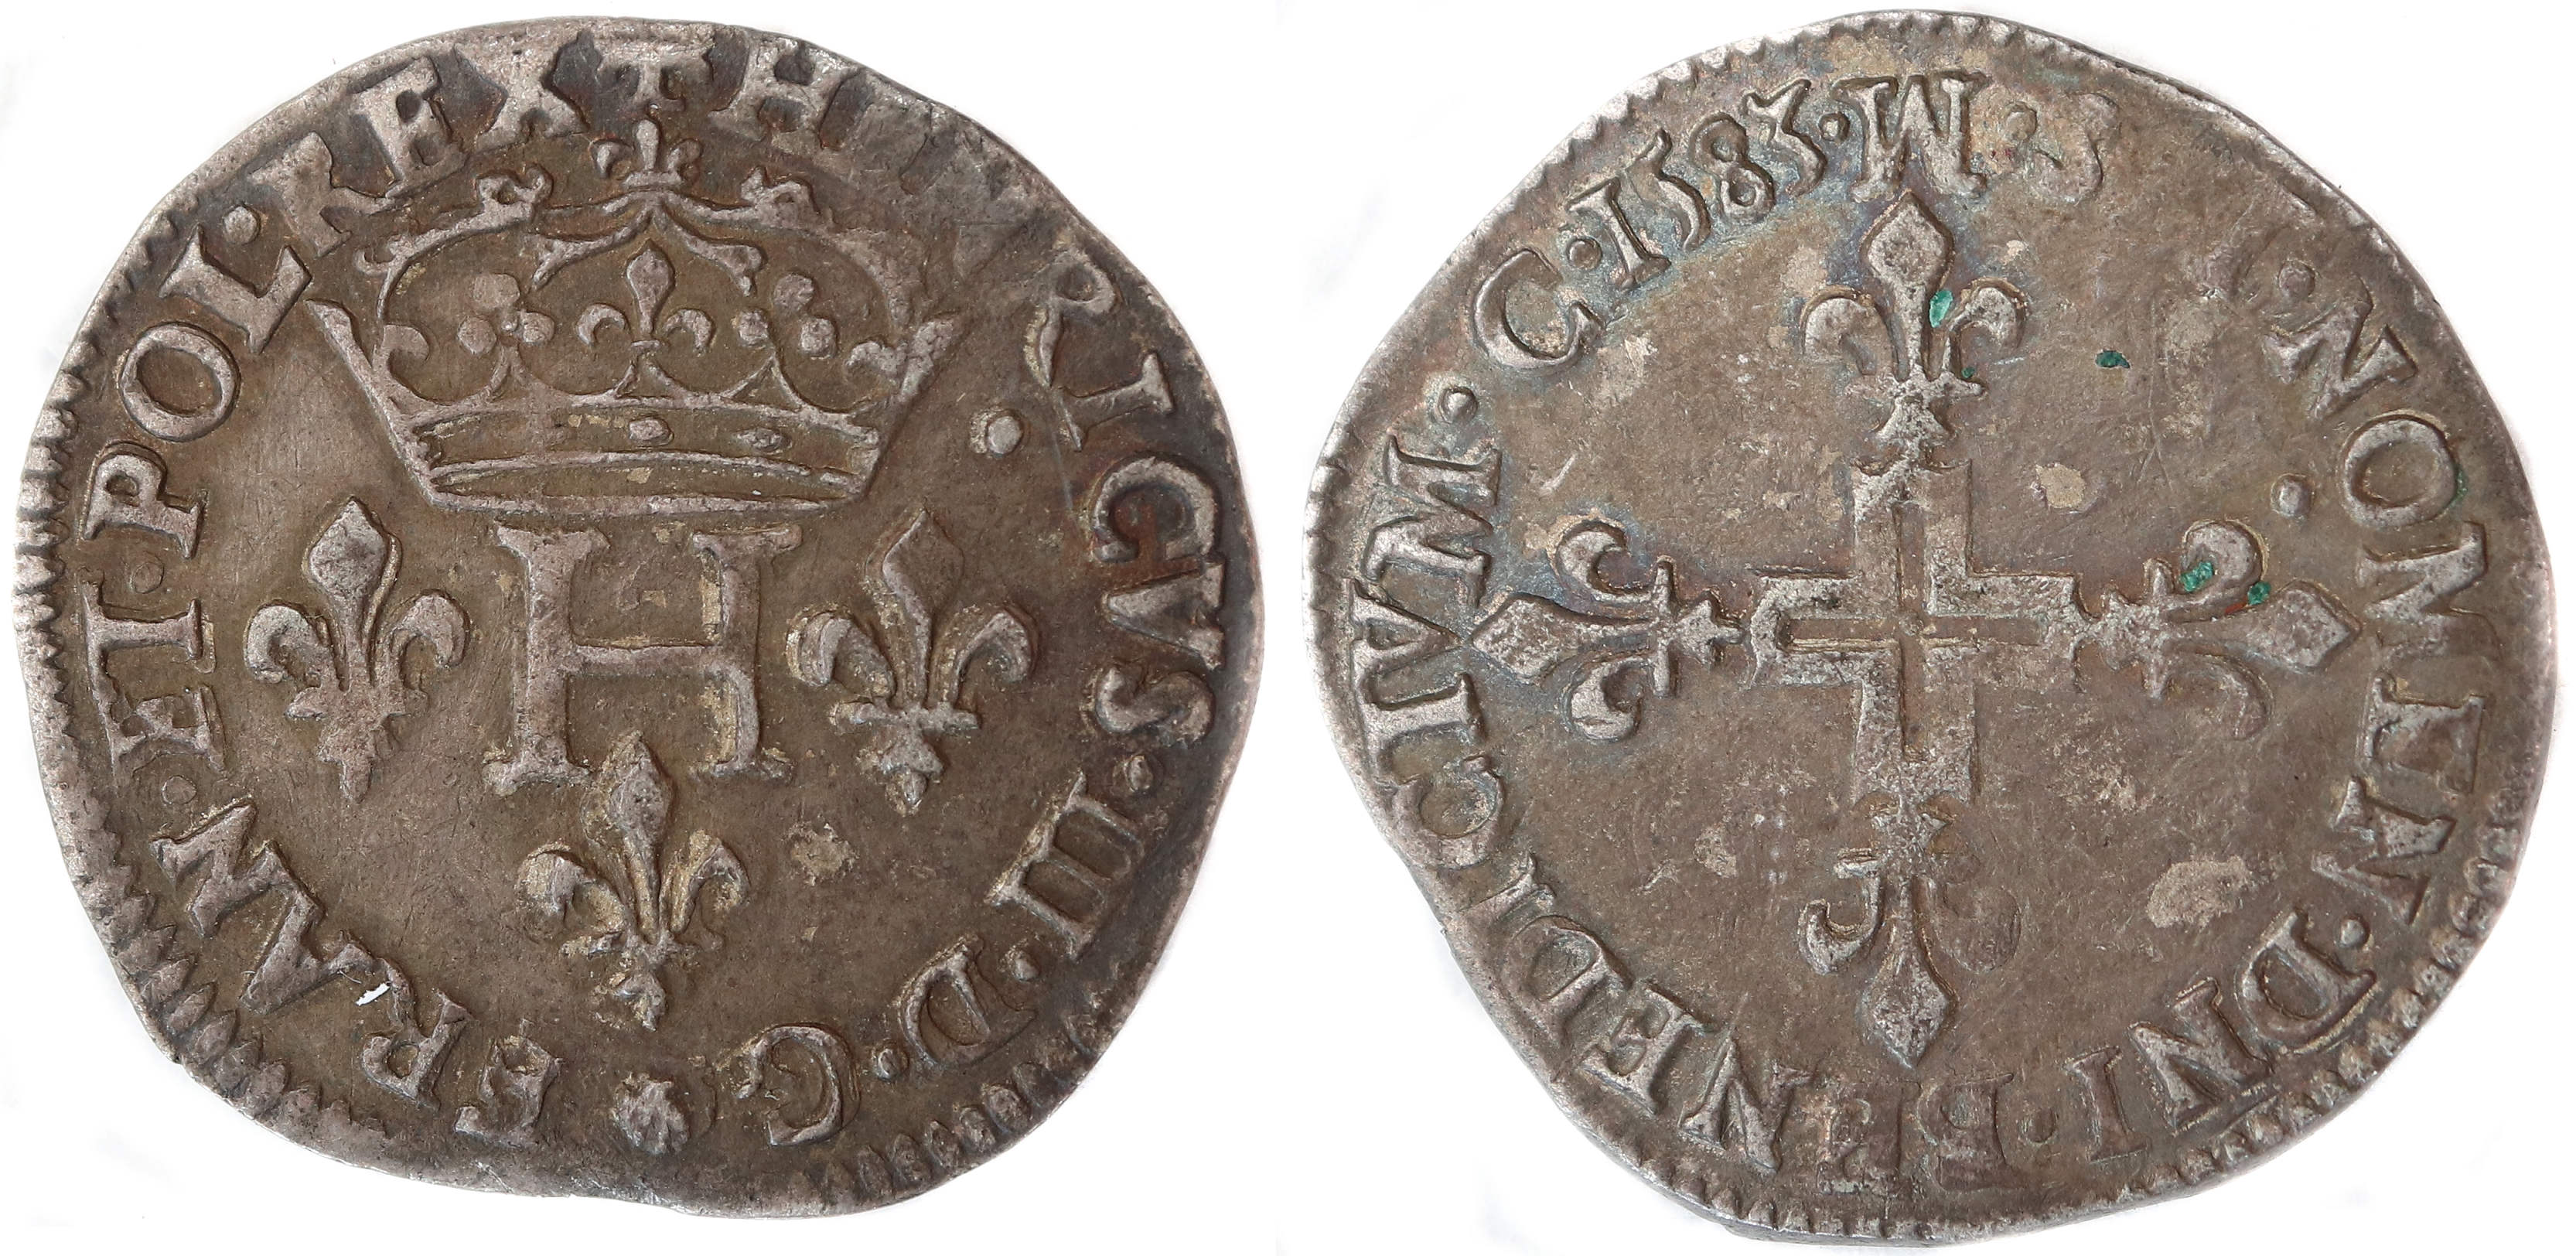 HENR III DOUBLE SOL 1583 TOULOUSE